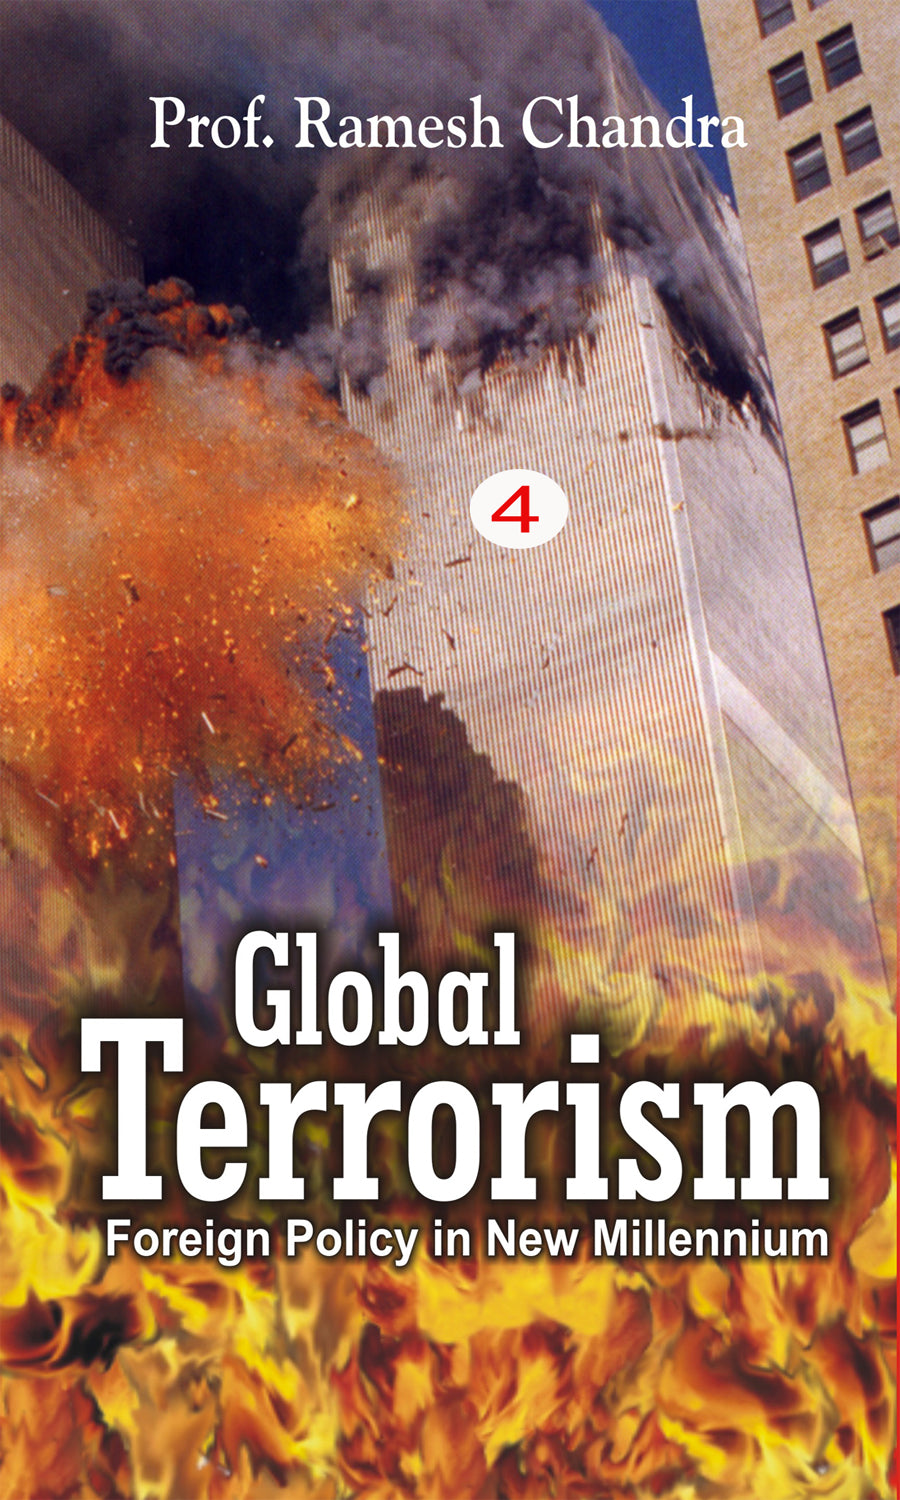 Global Terrorism: Foreign Policy in Th New Millennium (Foreign Policy in the Age of Terrorism) Volume Vol. 3rd [Hardcover]